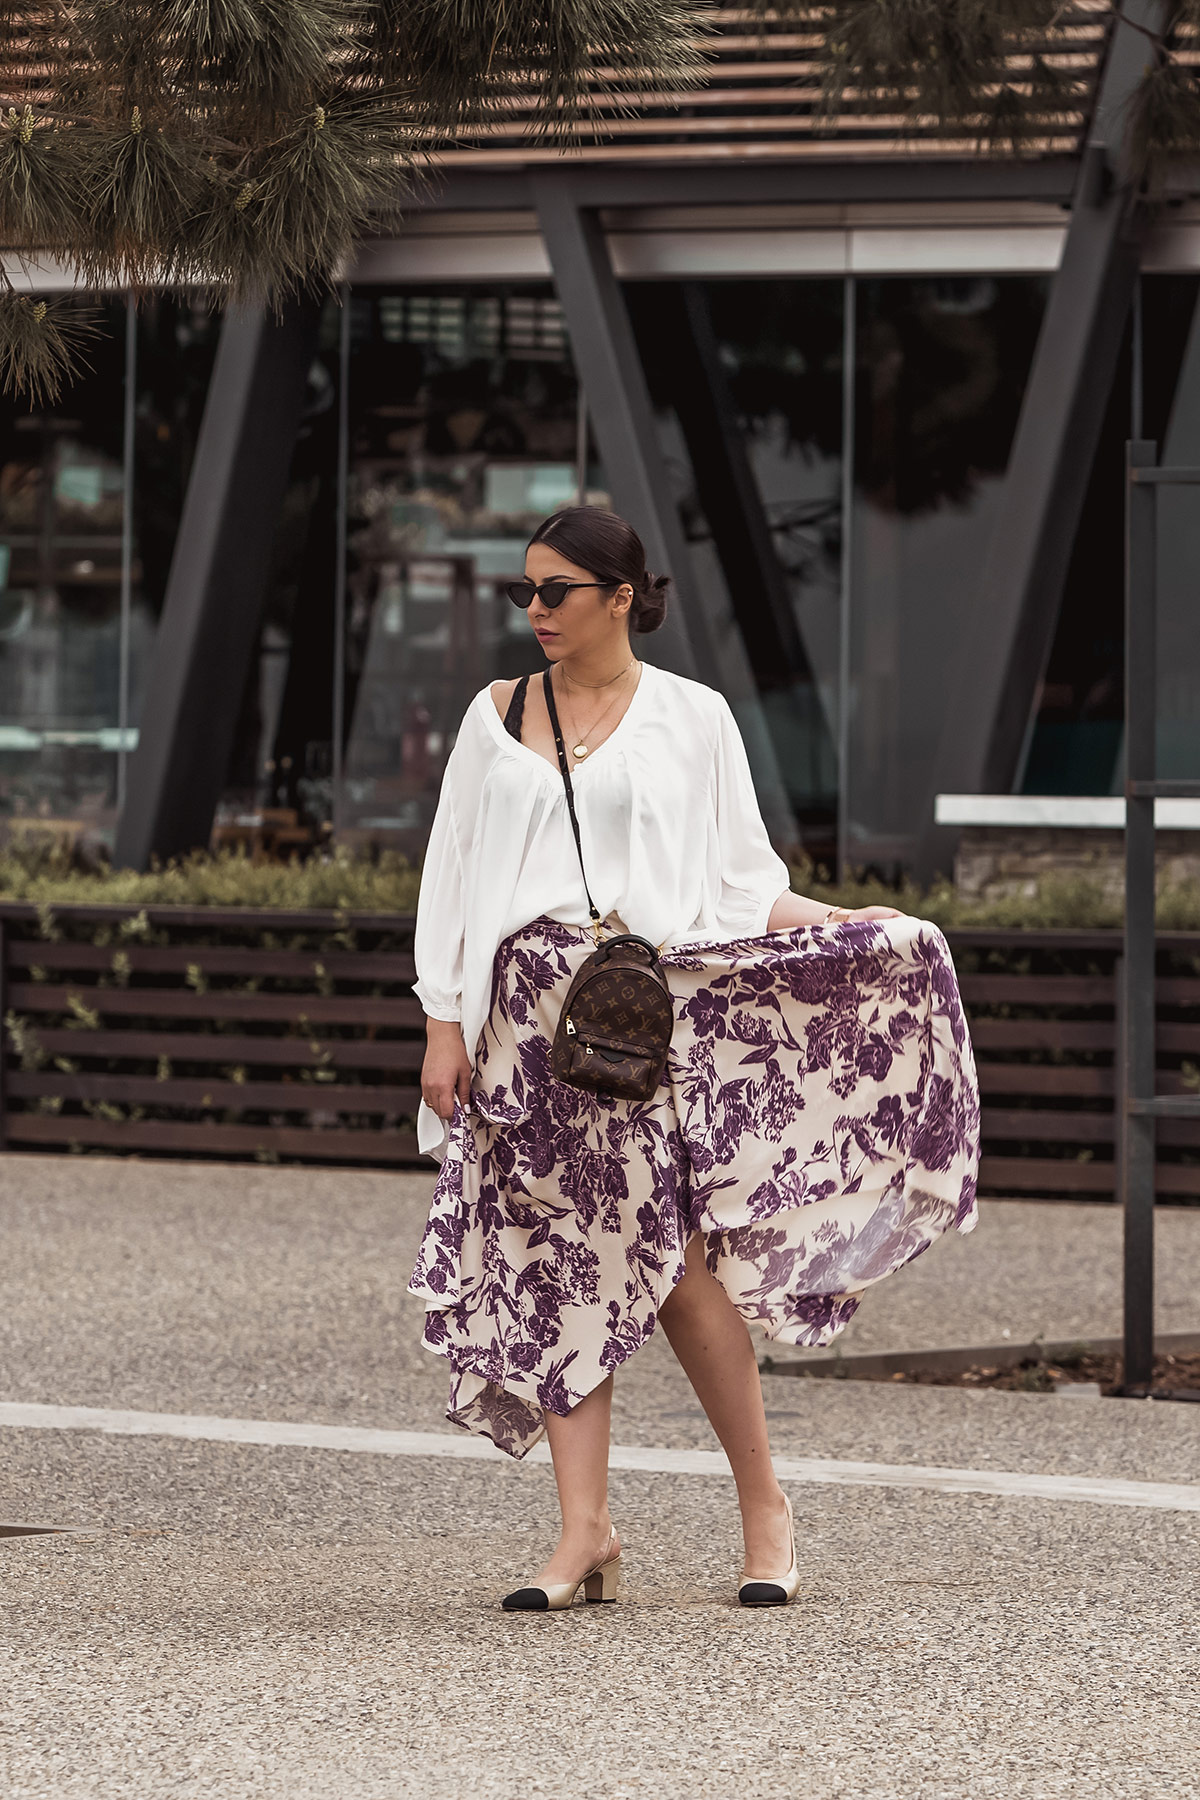 Oversized look by Stella Asteria - 5 Tips To Rock The Oversized Look